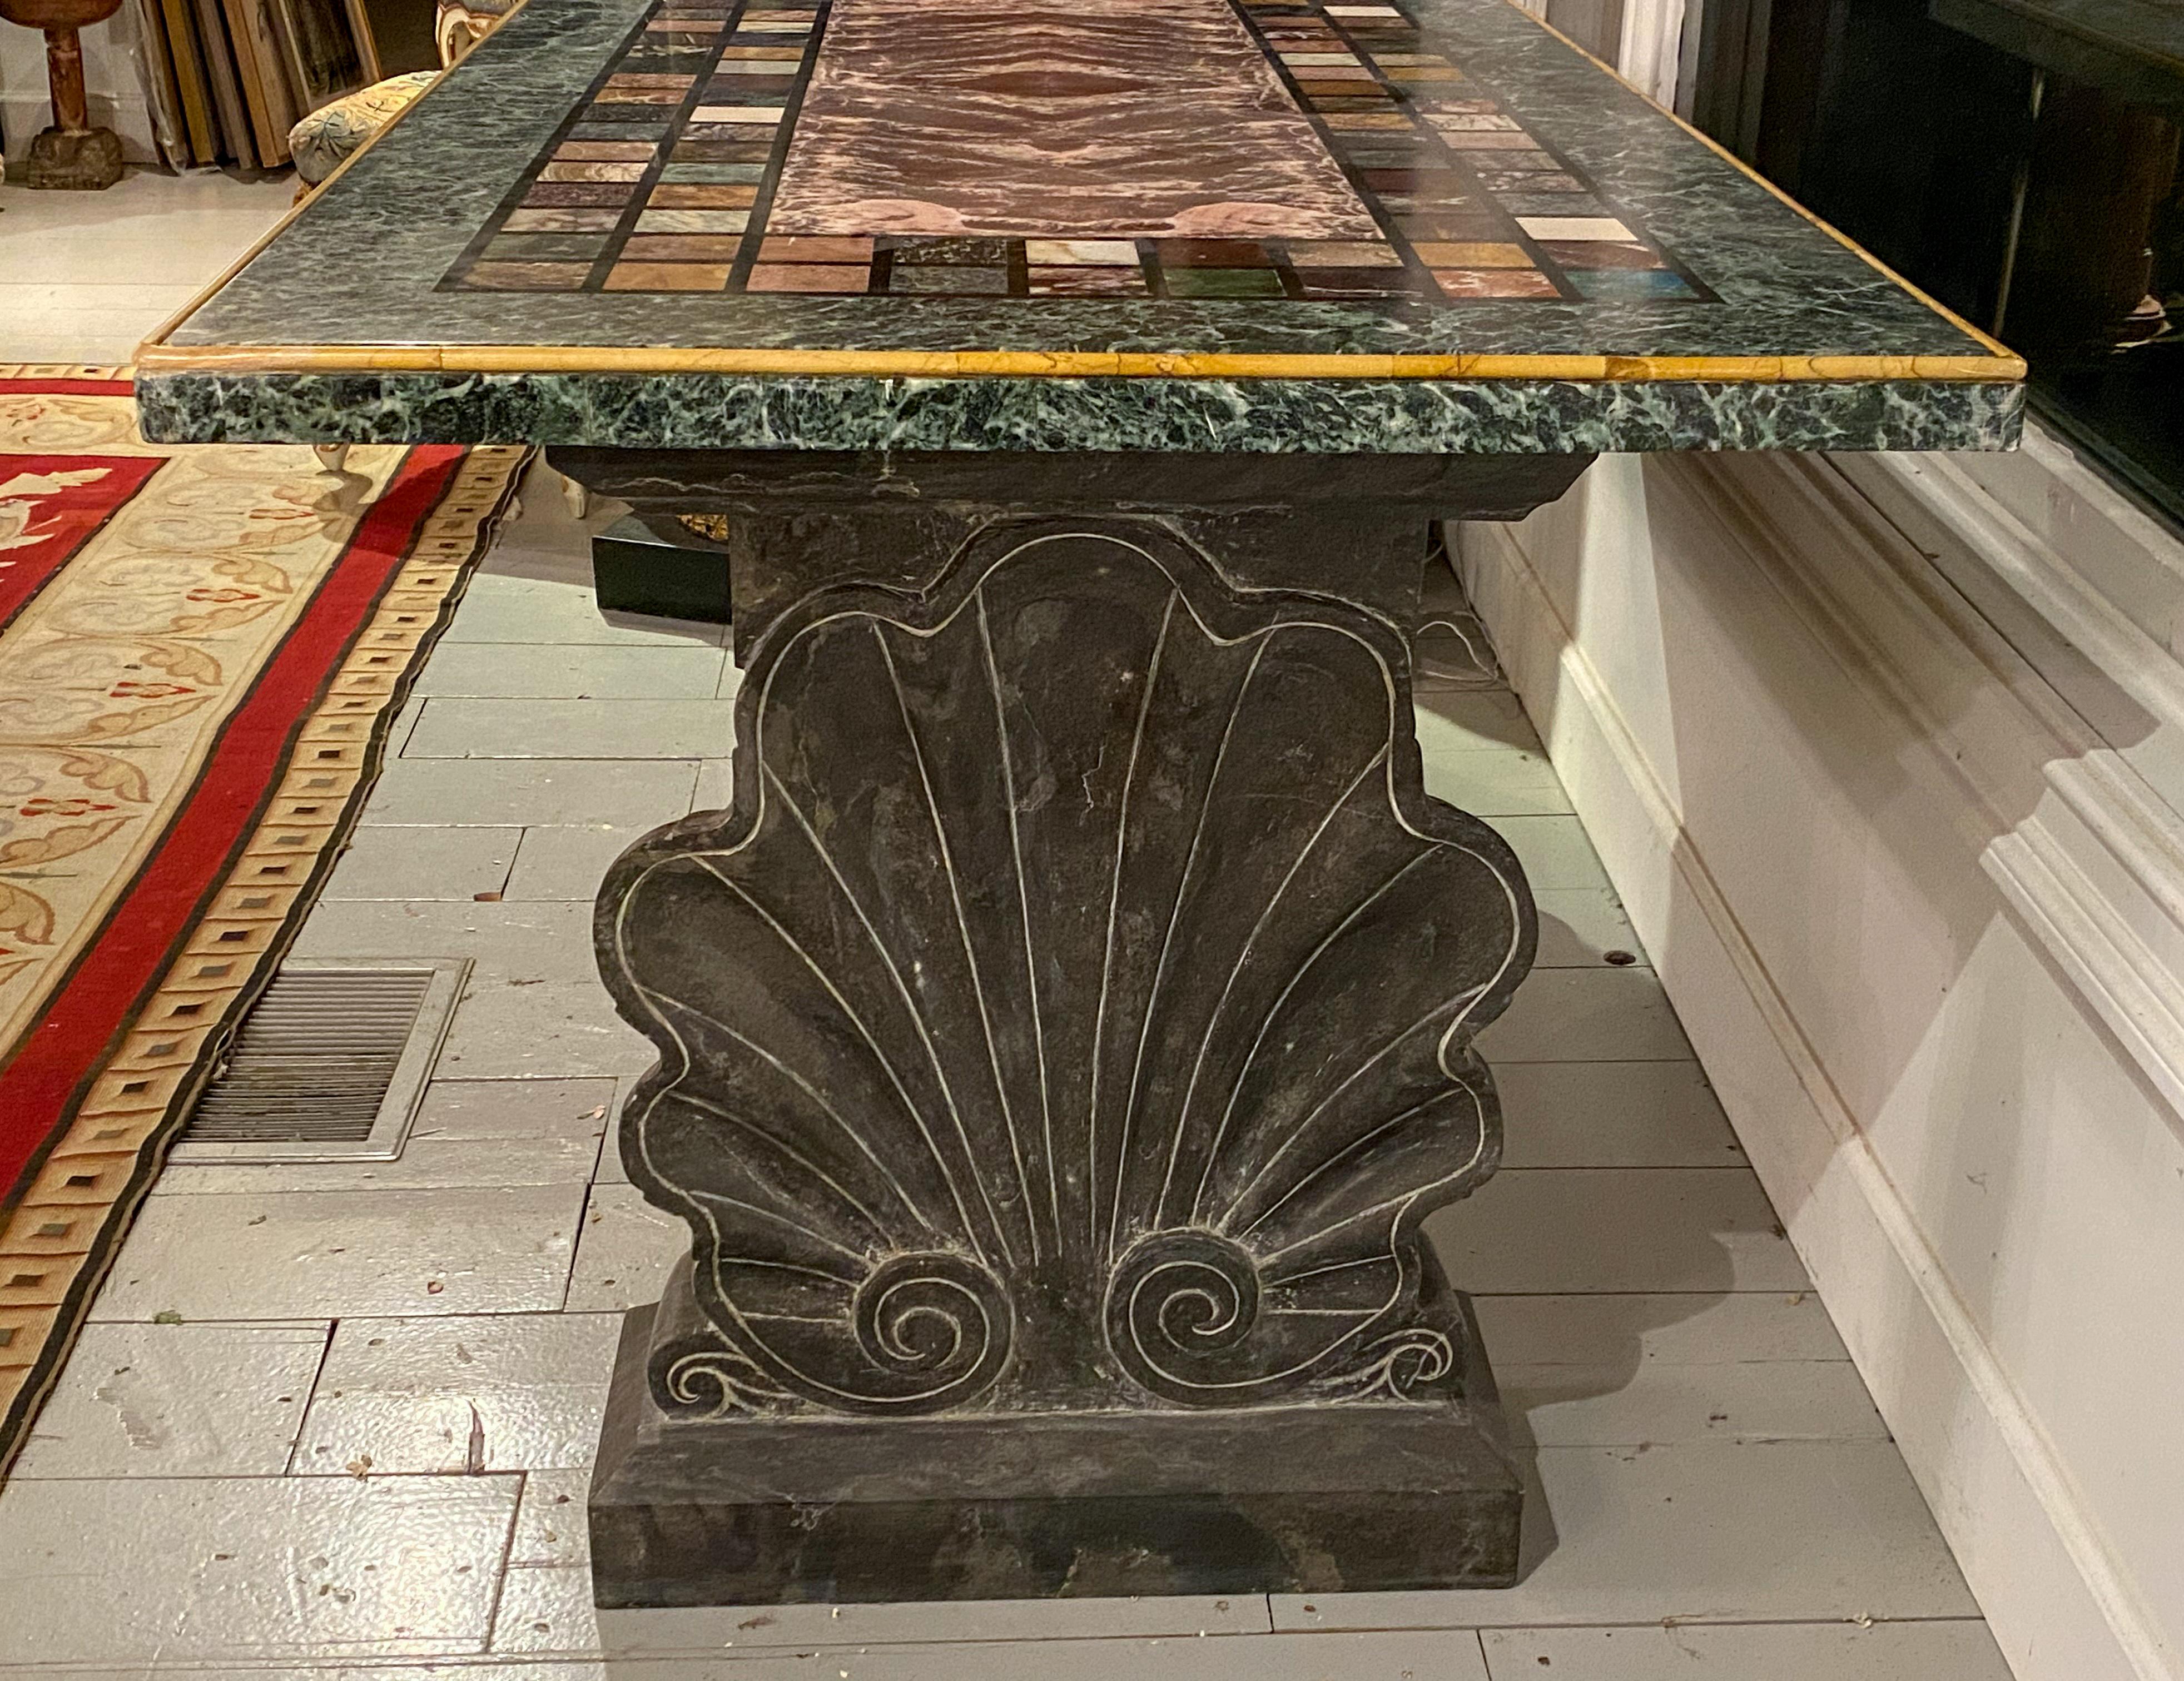 An unusual “Specimen Petra Dura” marble top table
Resting on very rare shell form support bases
Possibly Florence, Italy
19th century

Measures: Height 31 in, width 61 in, depth 33 ½ in.

Provenance:
Private Collection Palm Beach, FL.
   